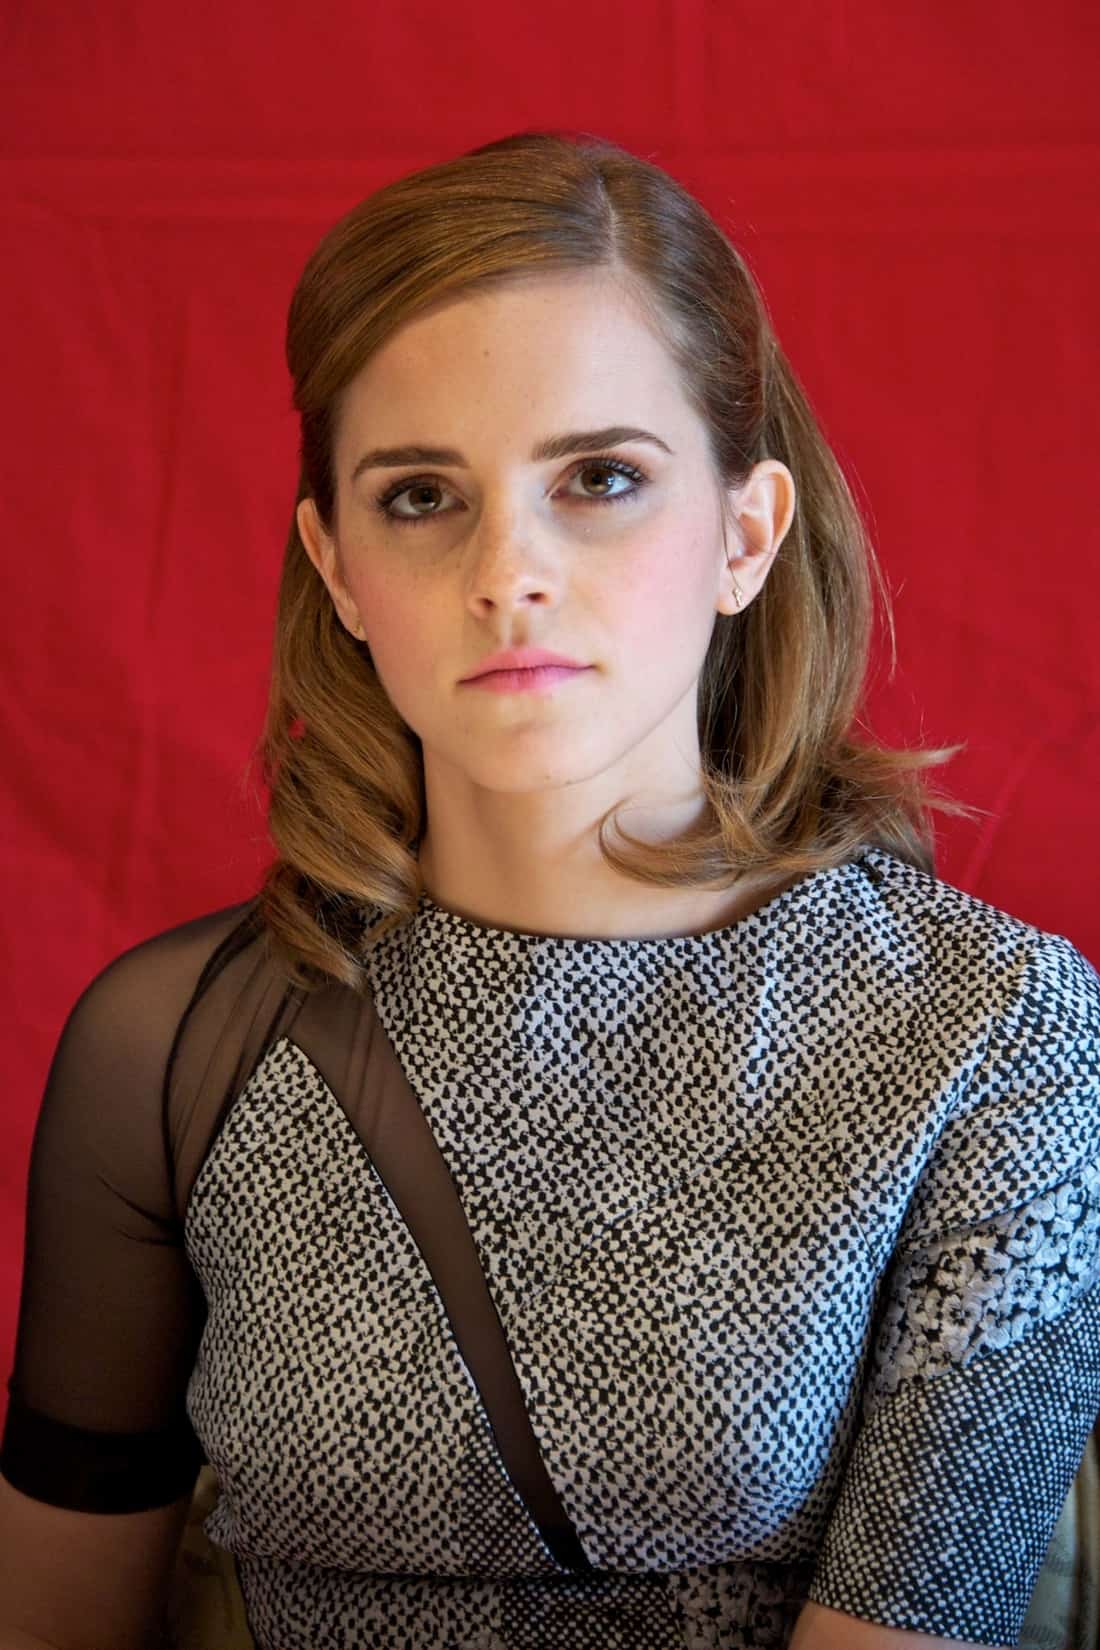 Emma Watson Oozes Beauty at the "The Bling Ring" Photocall and Conference